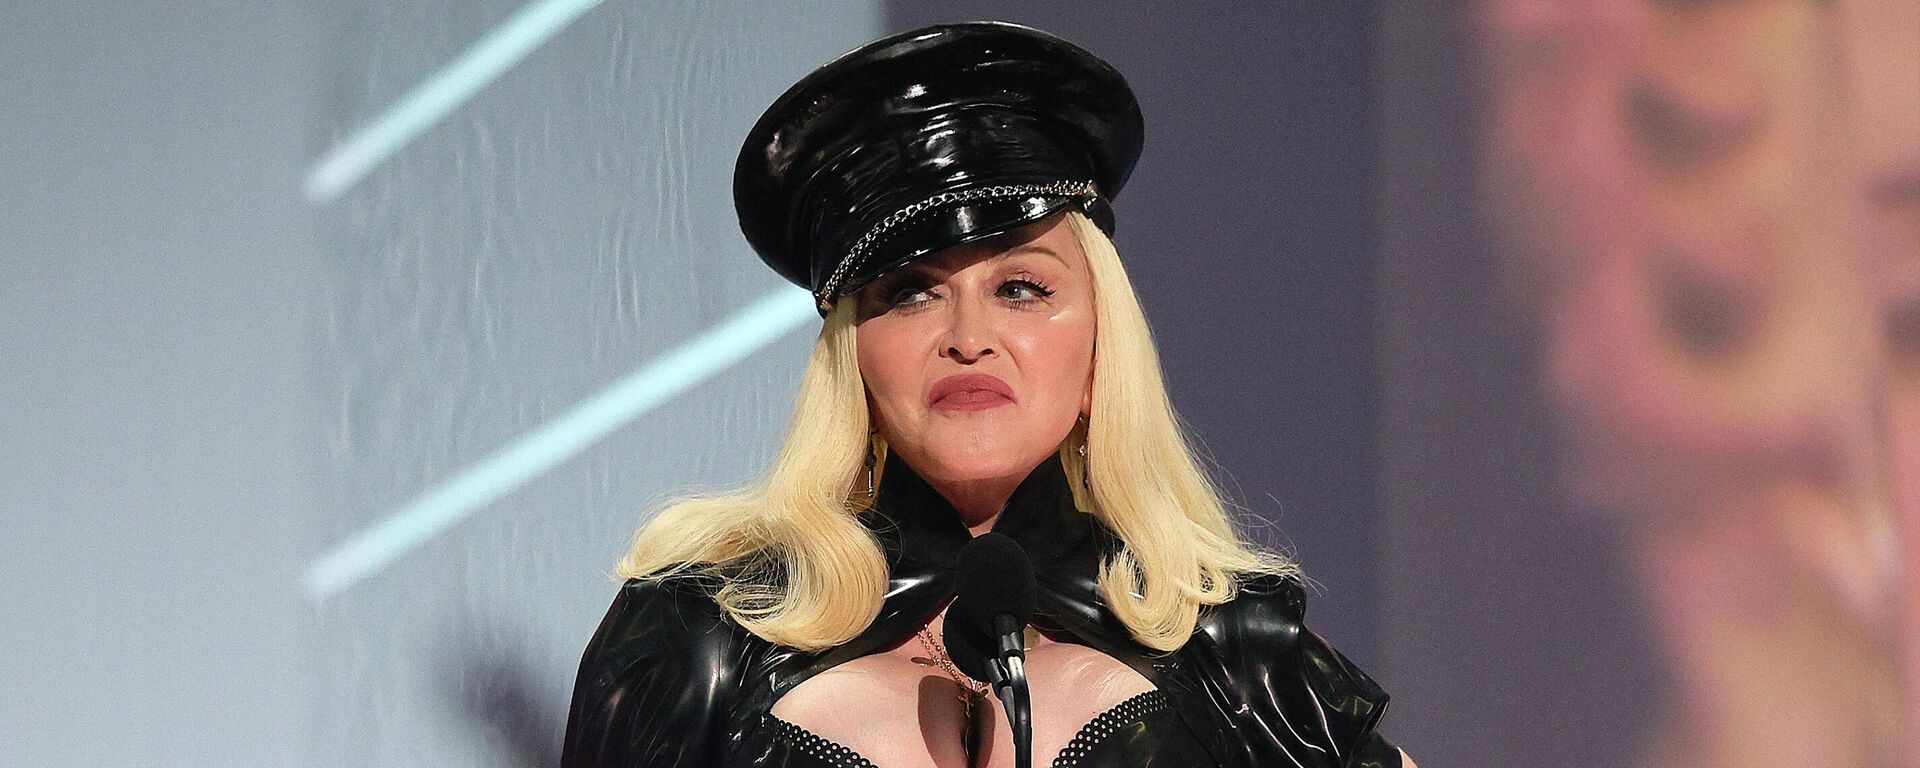 Madonna speaks onstage during the 2021 MTV Video Music Awards at Barclays Center on September 12, 2021 in the Brooklyn borough of New York City. - Sputnik International, 1920, 19.03.2022